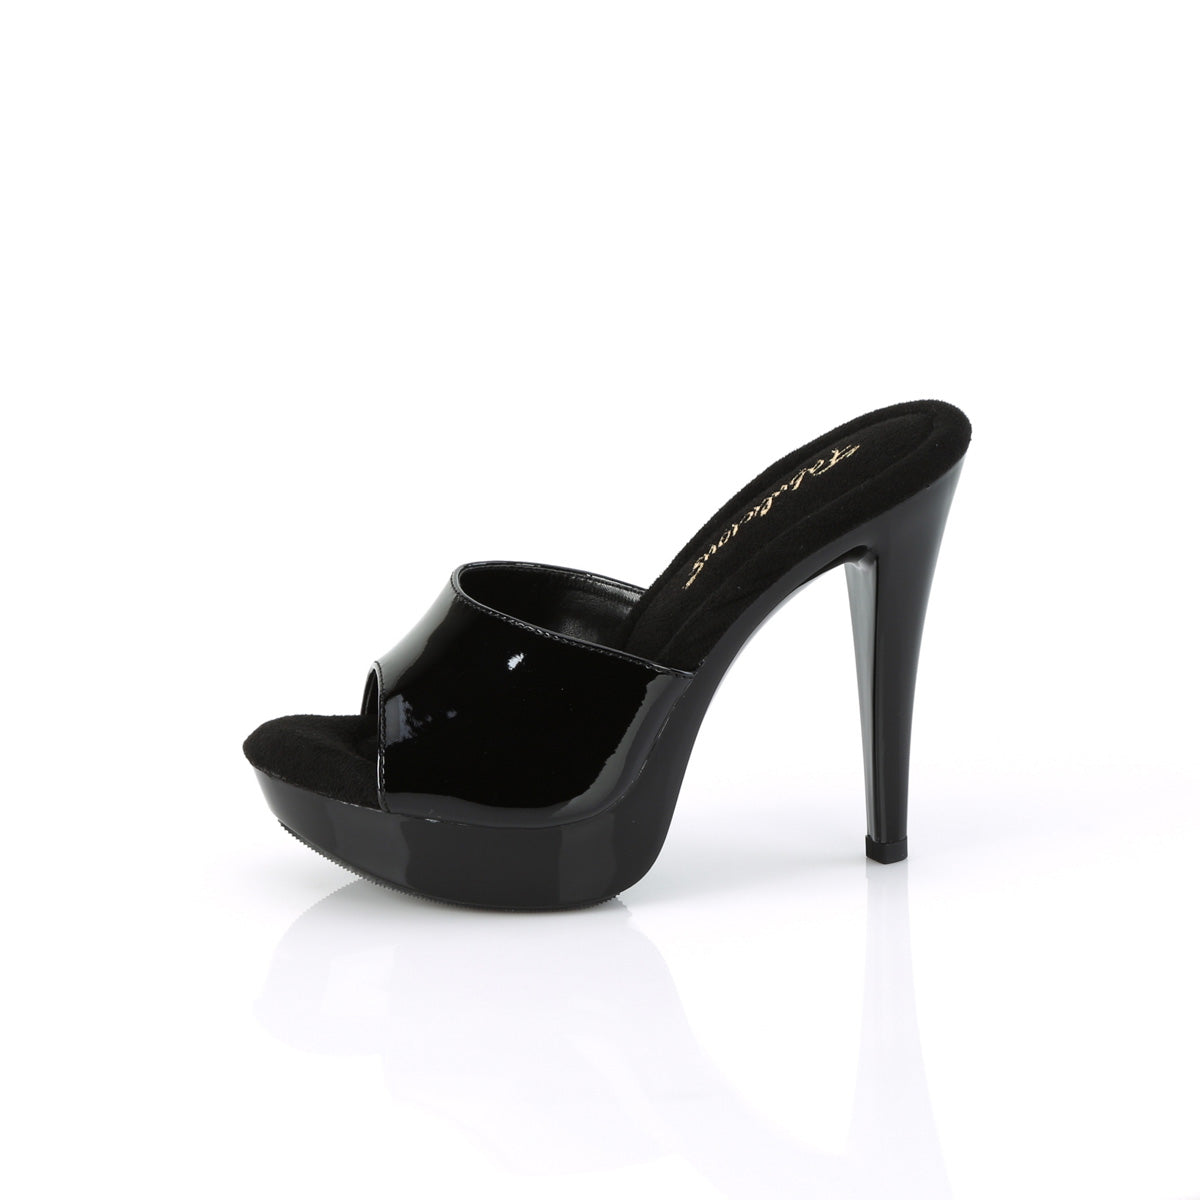 COCKTAIL-501 Fabulicious Black Shoes [Sexy Shoes]